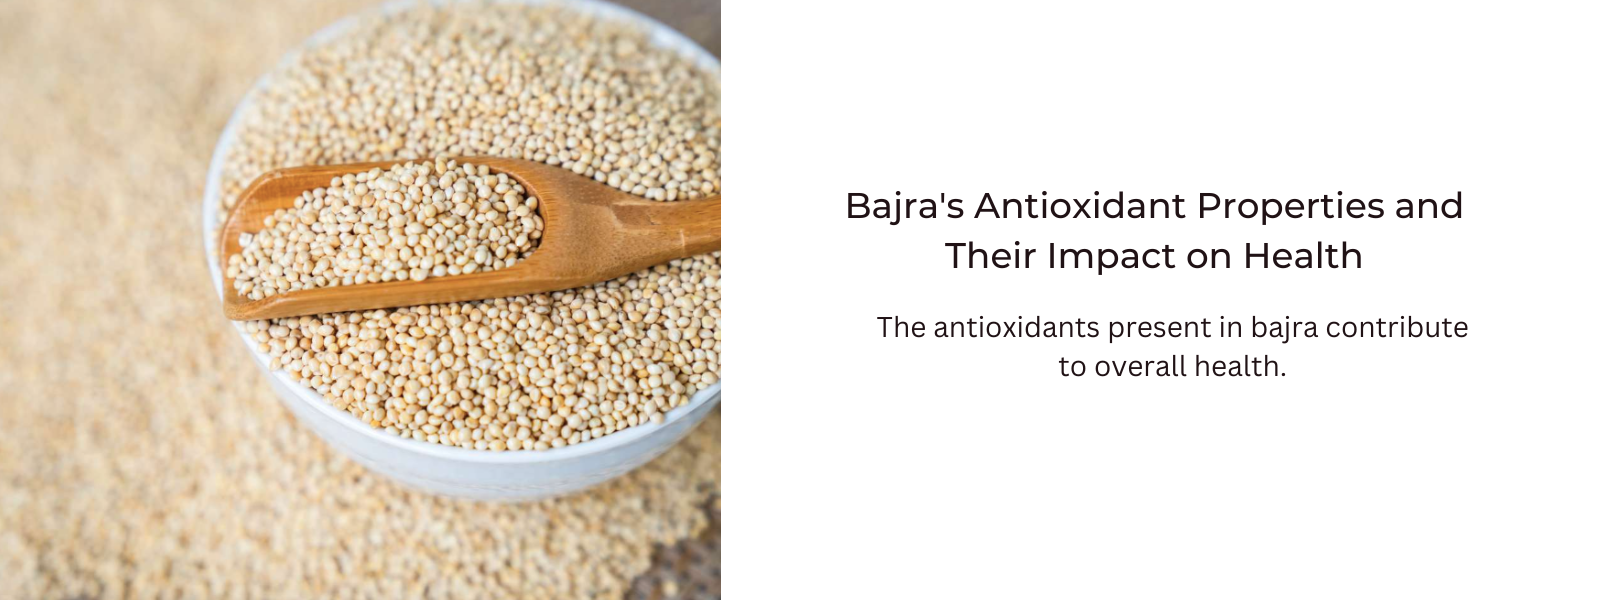 Bajra's Antioxidant Properties and Their Impact on Health